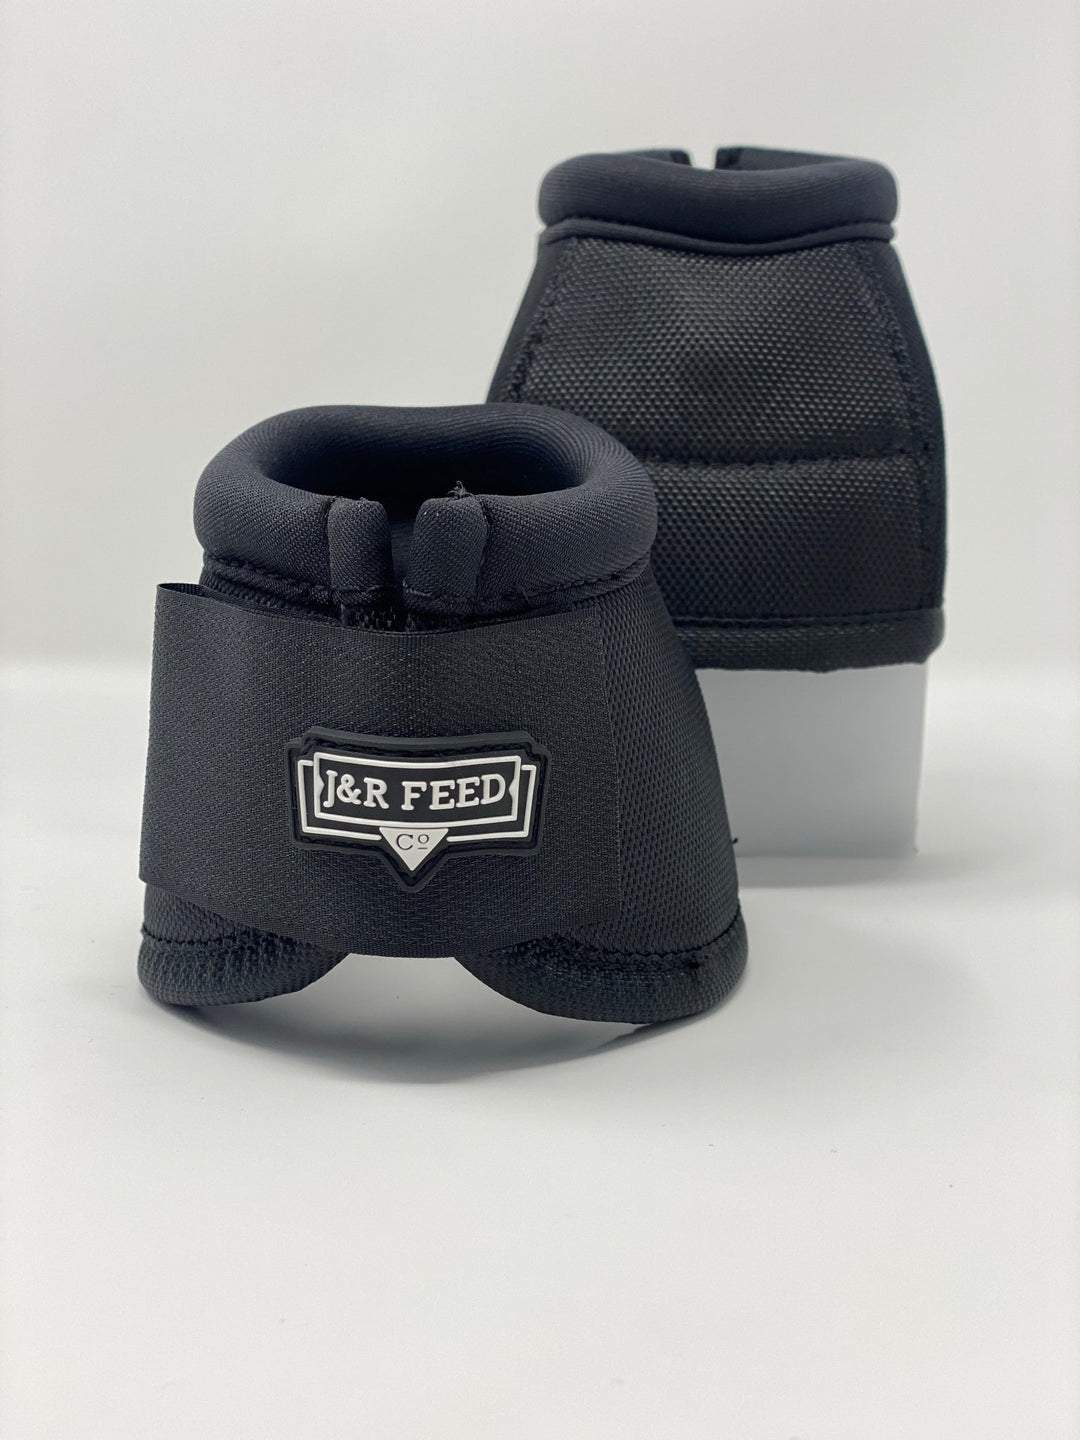 J&R NO TURN BELL BOOT - J&R Tack & Feed CO